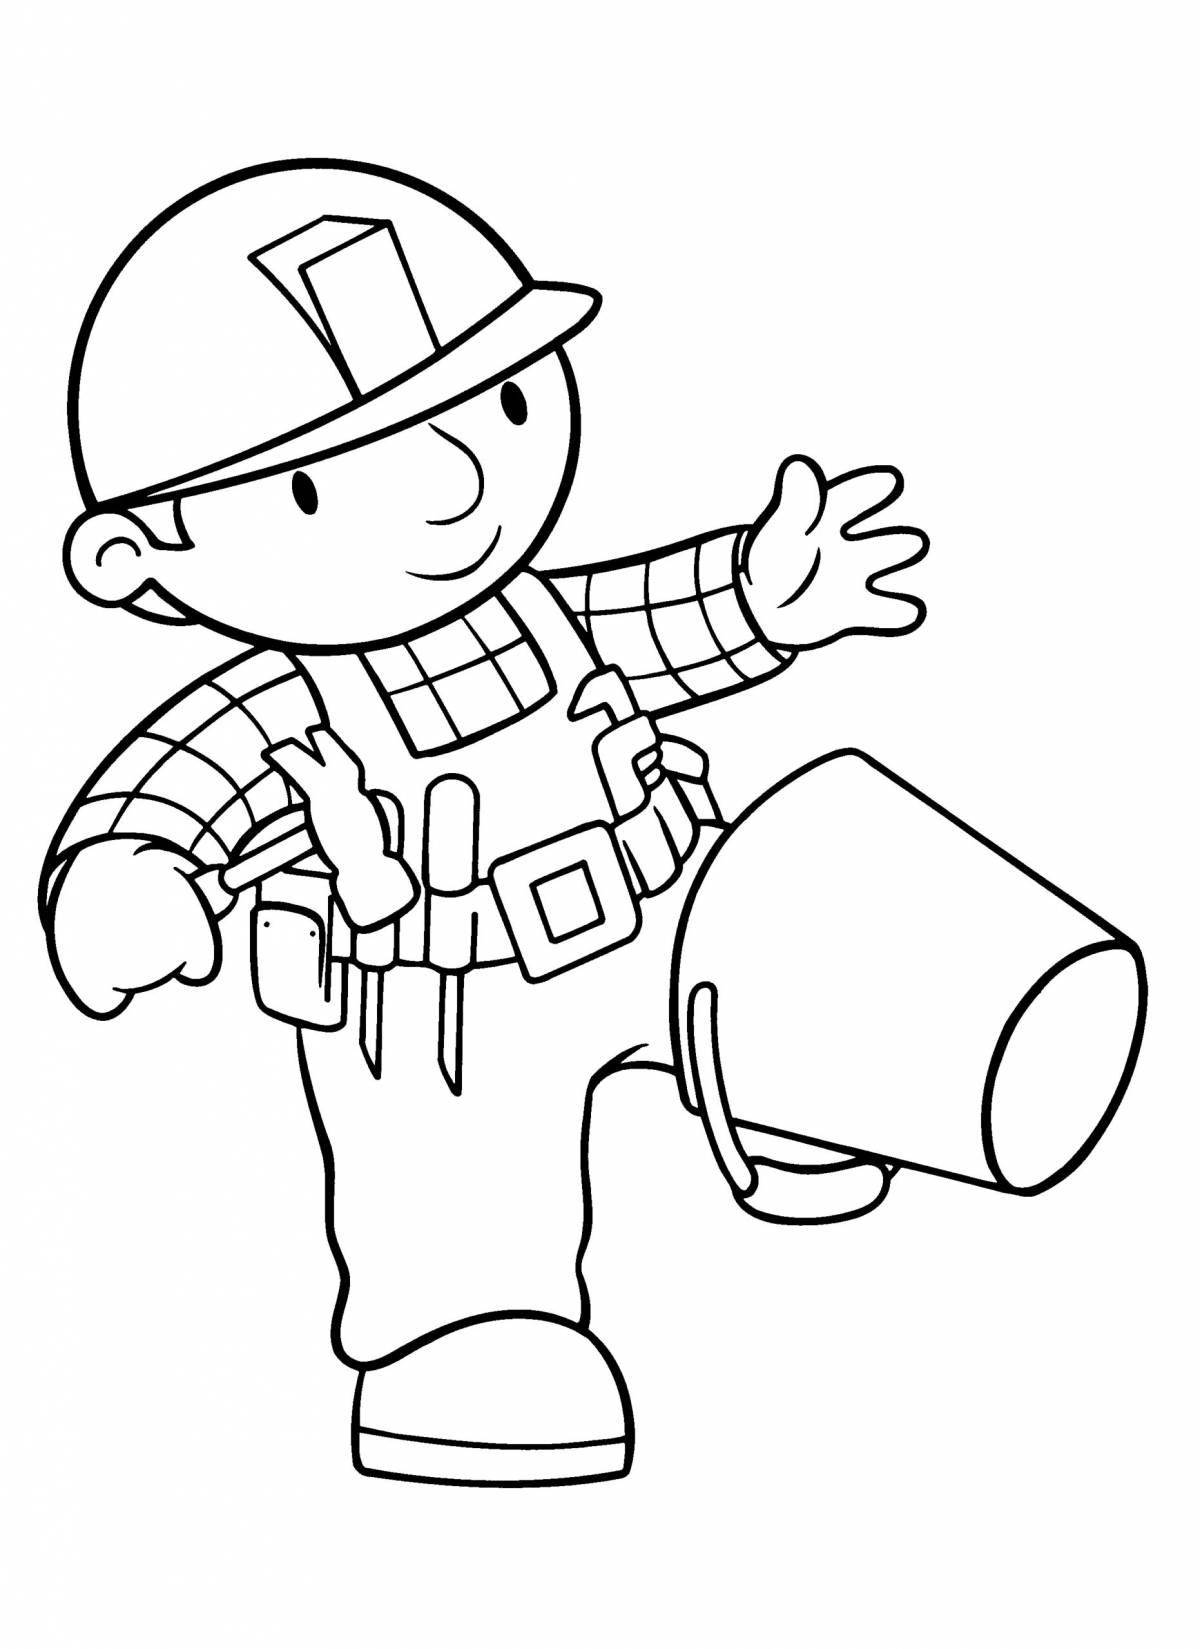 Reliable builder coloring page